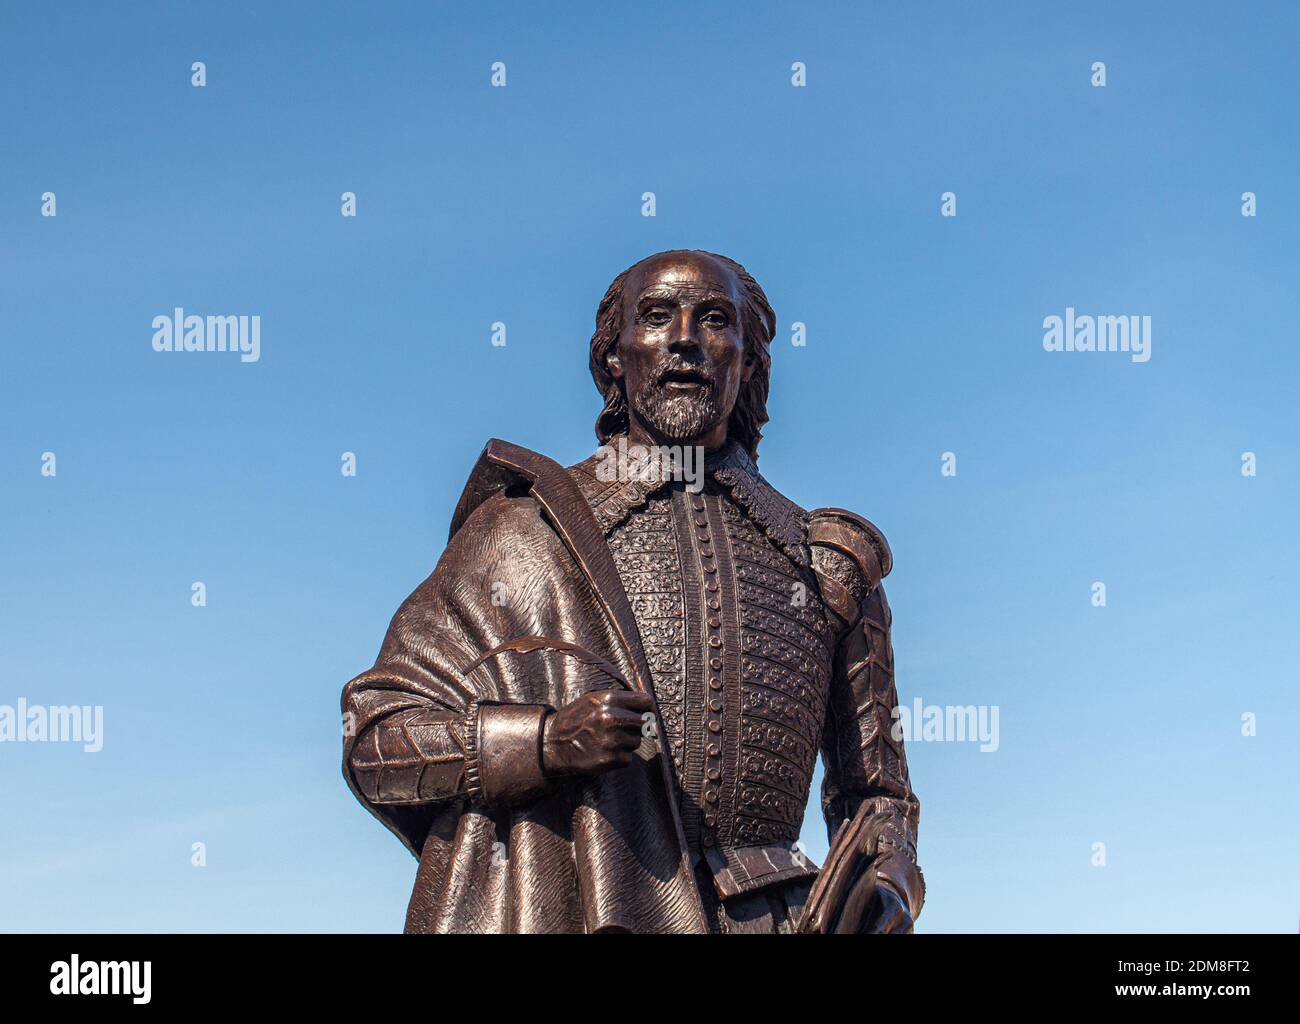 Statue close up of the Bard, William Shakespeare, in the middle of Stratford-Upon-Avon Stock Photo